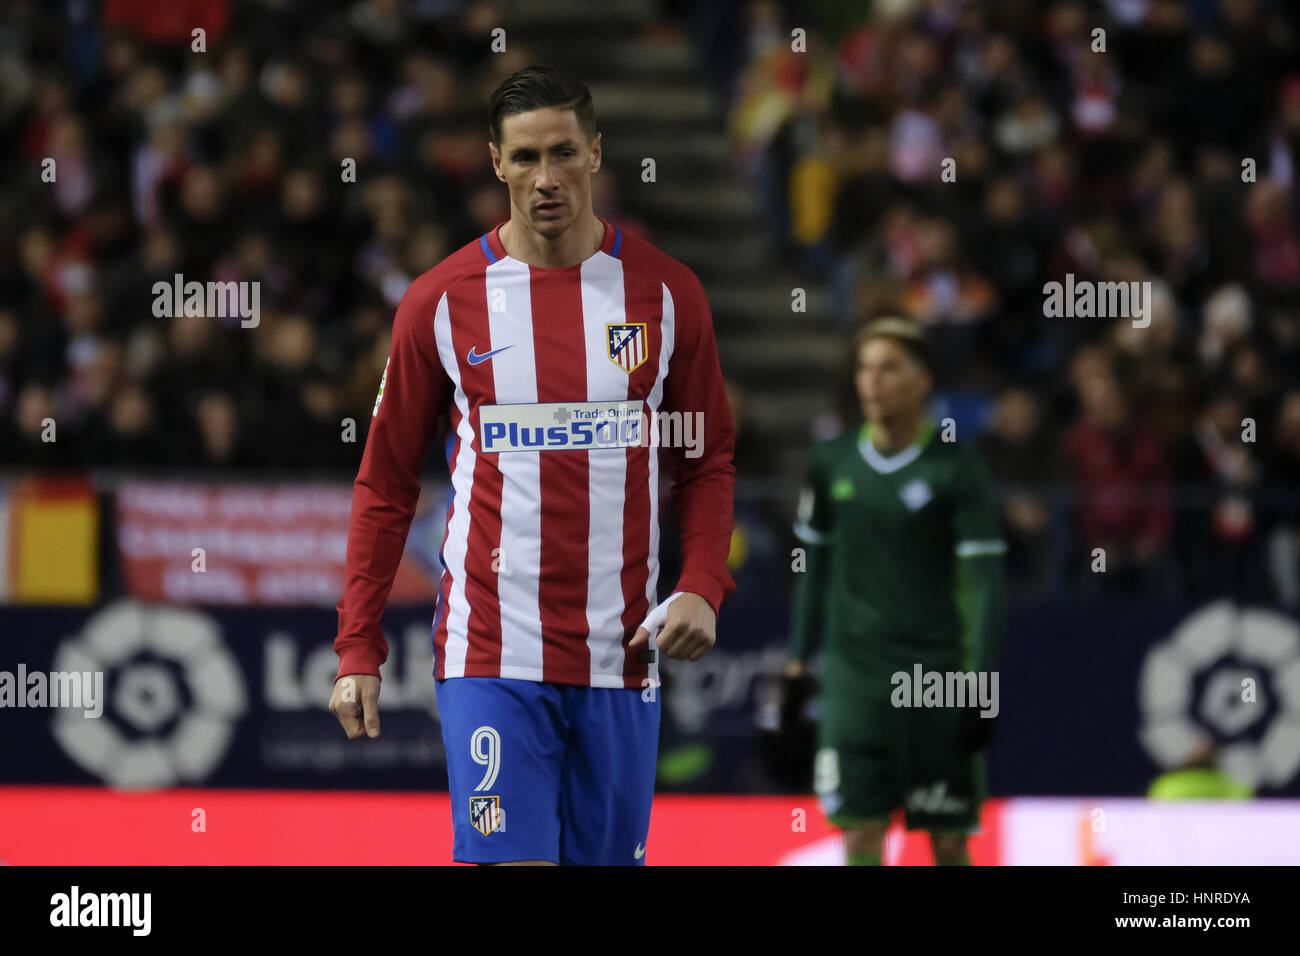 Fernando Torres in action for Atletico Madrid during the Spanish La Liga match between Atletico Madrid and Real Betis at the Estadio Vicente Calderón in Madrid, Spain.  Featuring: Fernando Torres Where: Madrid, Community of Madrid, Spain When: 14 Jan 2017 Credit: Oscar Gonzalez/WENN.com Stock Photo